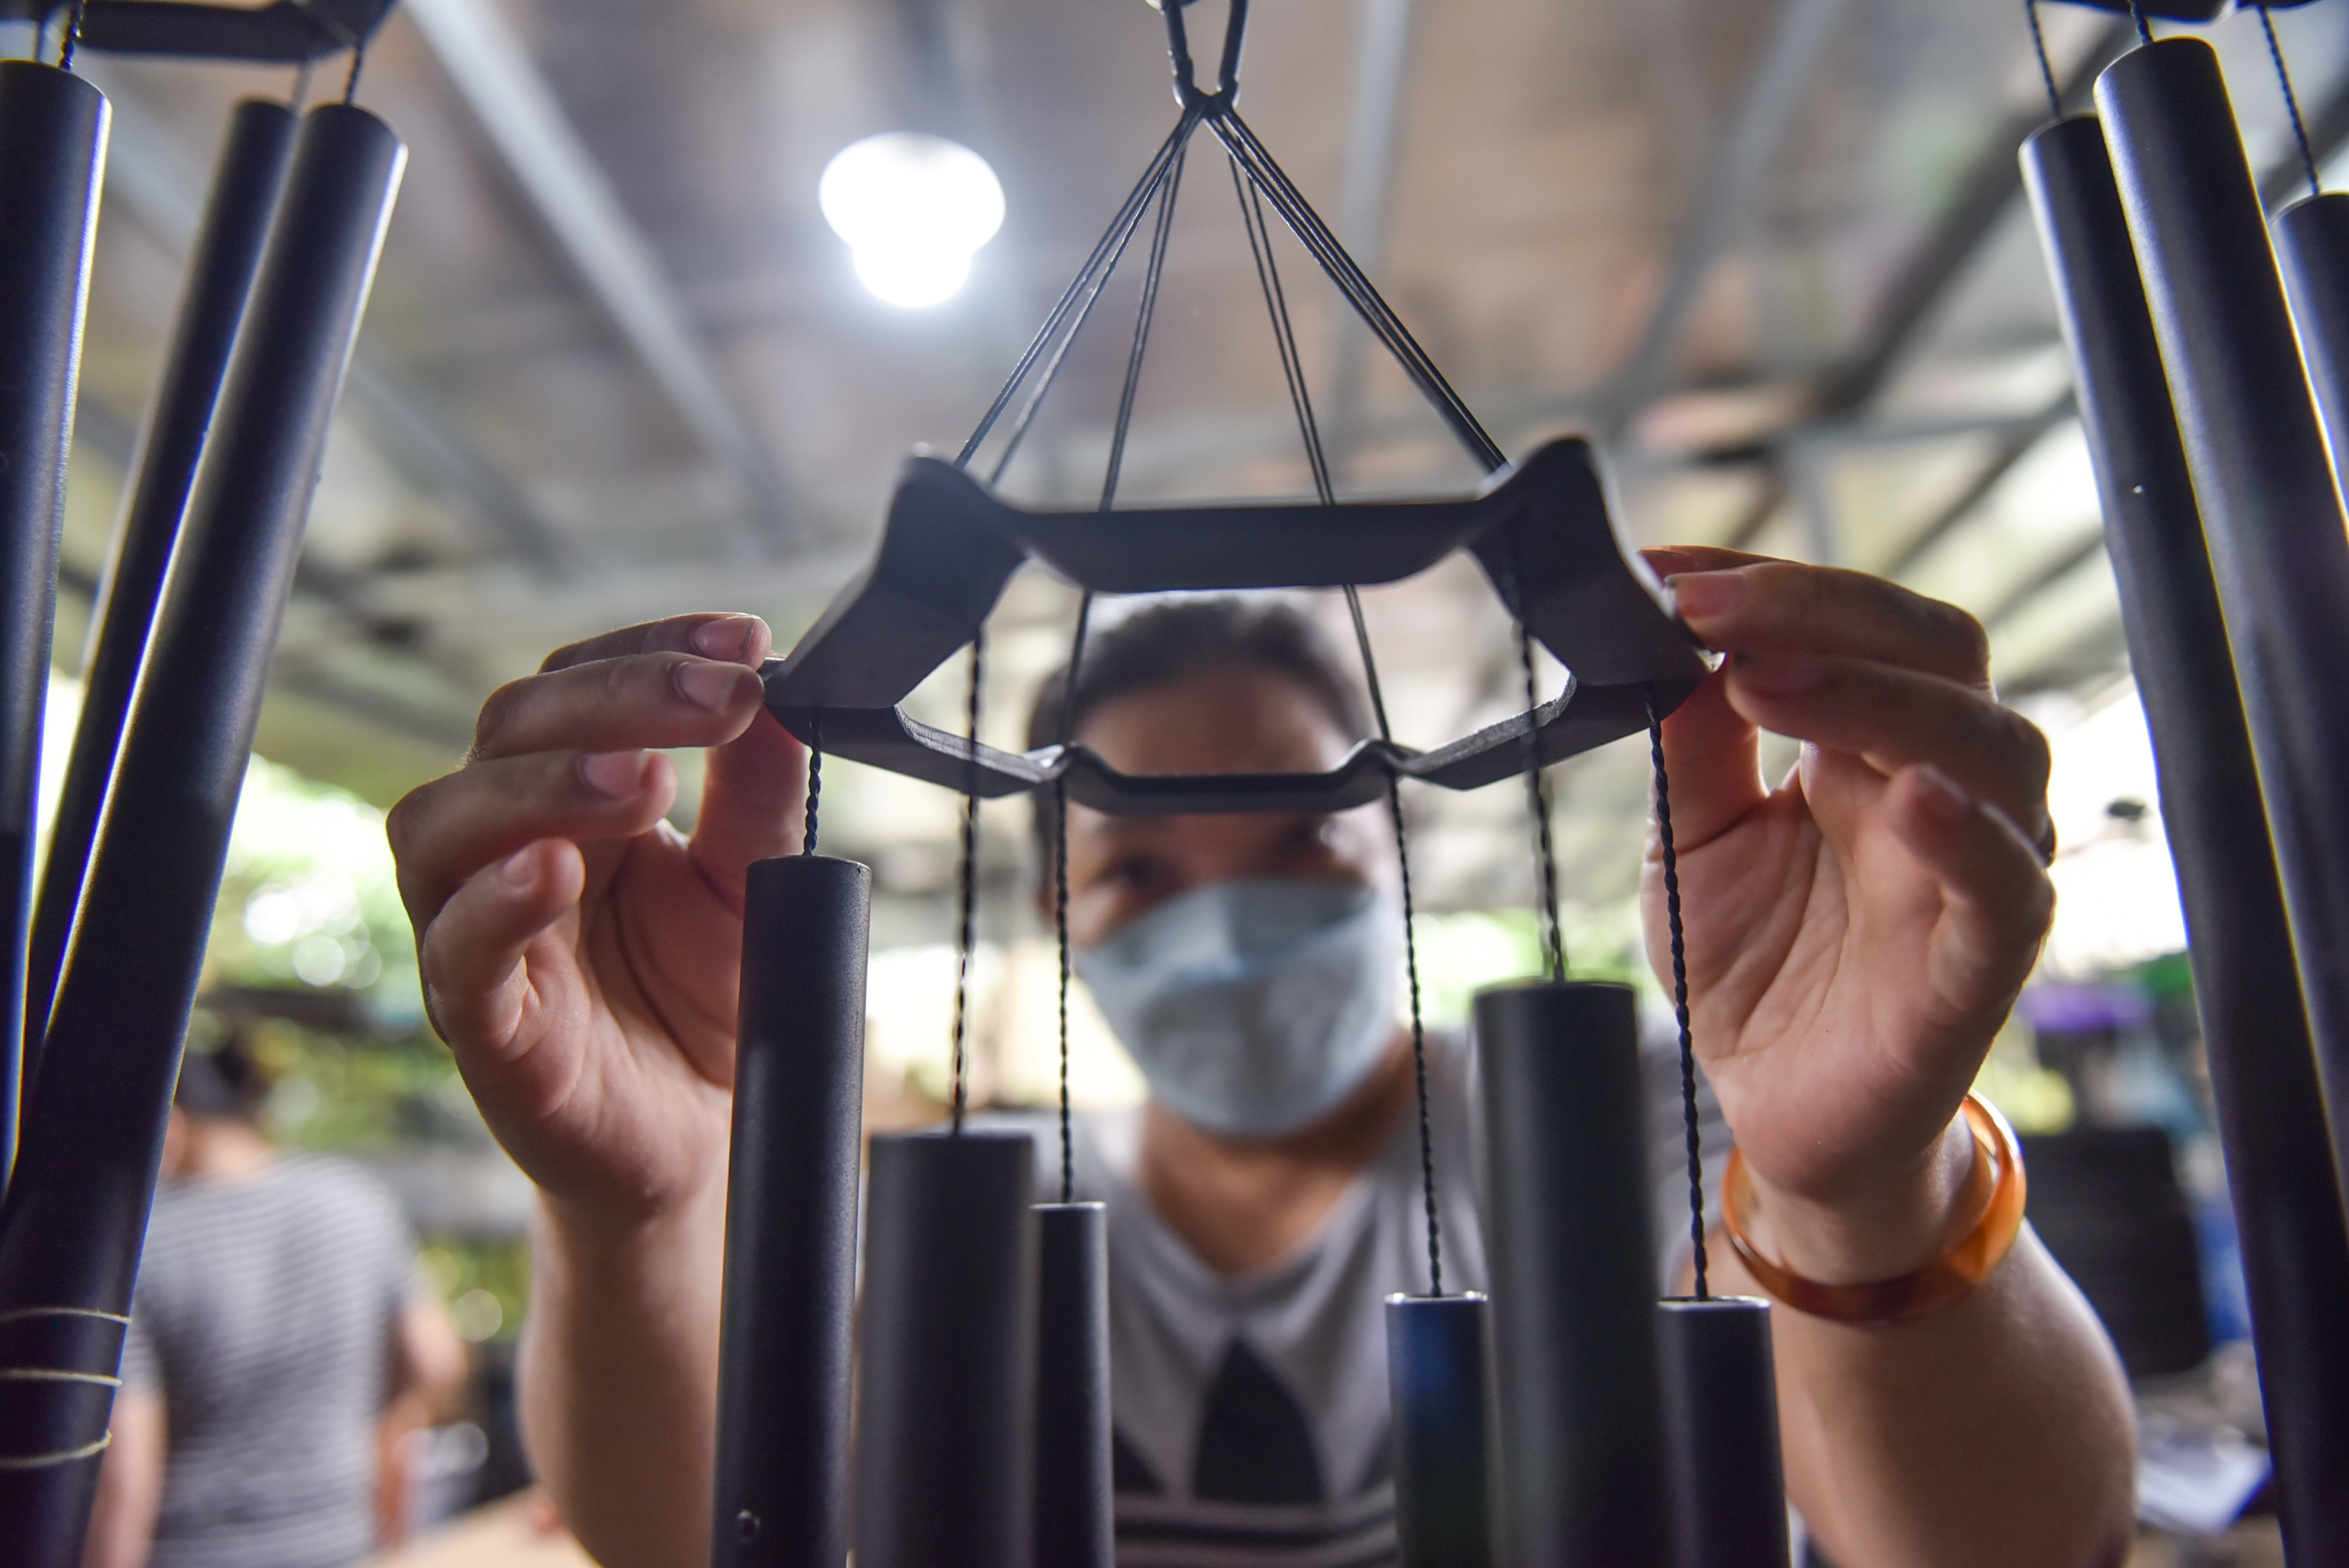 A staff member puts the top circle on to complete a set of wind chimes. Photo: Ngoc Phuong / Tuoi Tre News